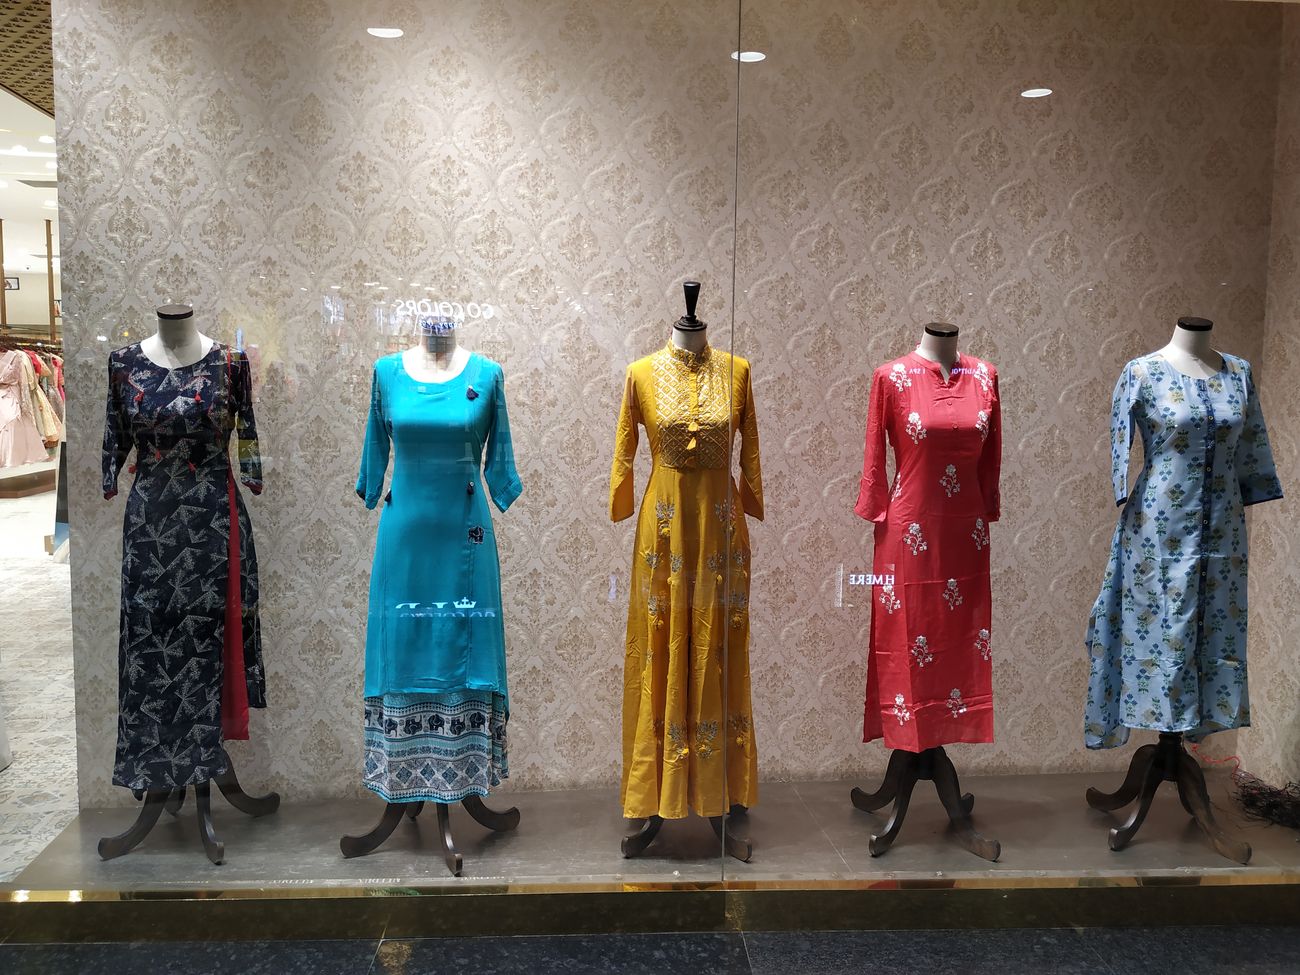 Colorful dresses in the window of a clothes store in Phoenix Market City lure customers inside